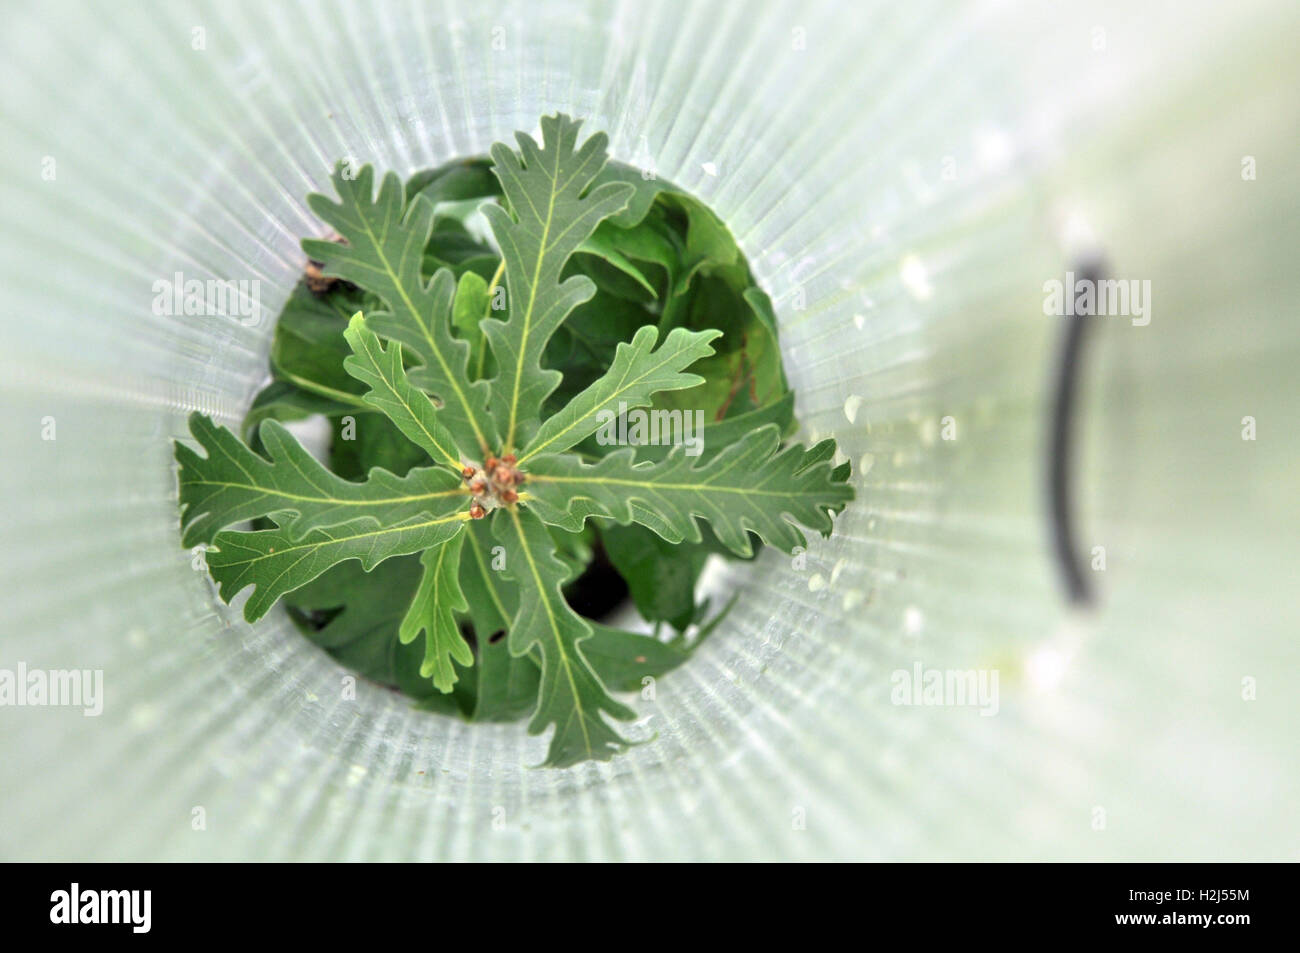 Oak tree protected from animals growing inside a defused plastic tube. Stock Photo